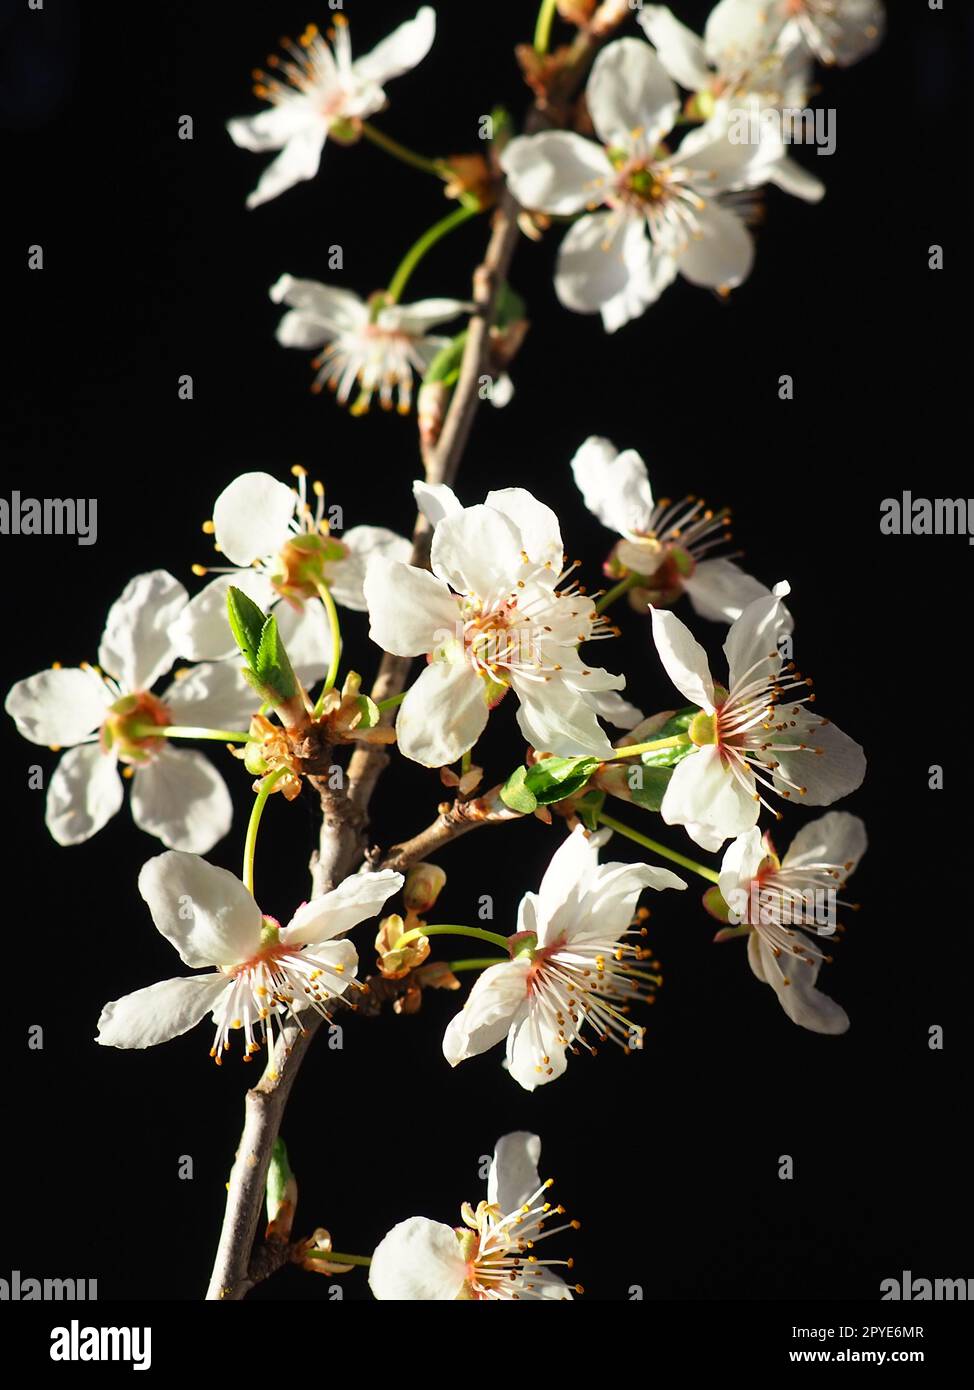 Bird cherry or cherry flowers on a black background. Close-up of a beautiful branch with white flowers. Bright spring bouquet. Prunus padus, known as bird cherry, hackberry, hagberry, or Mayday tree Stock Photo